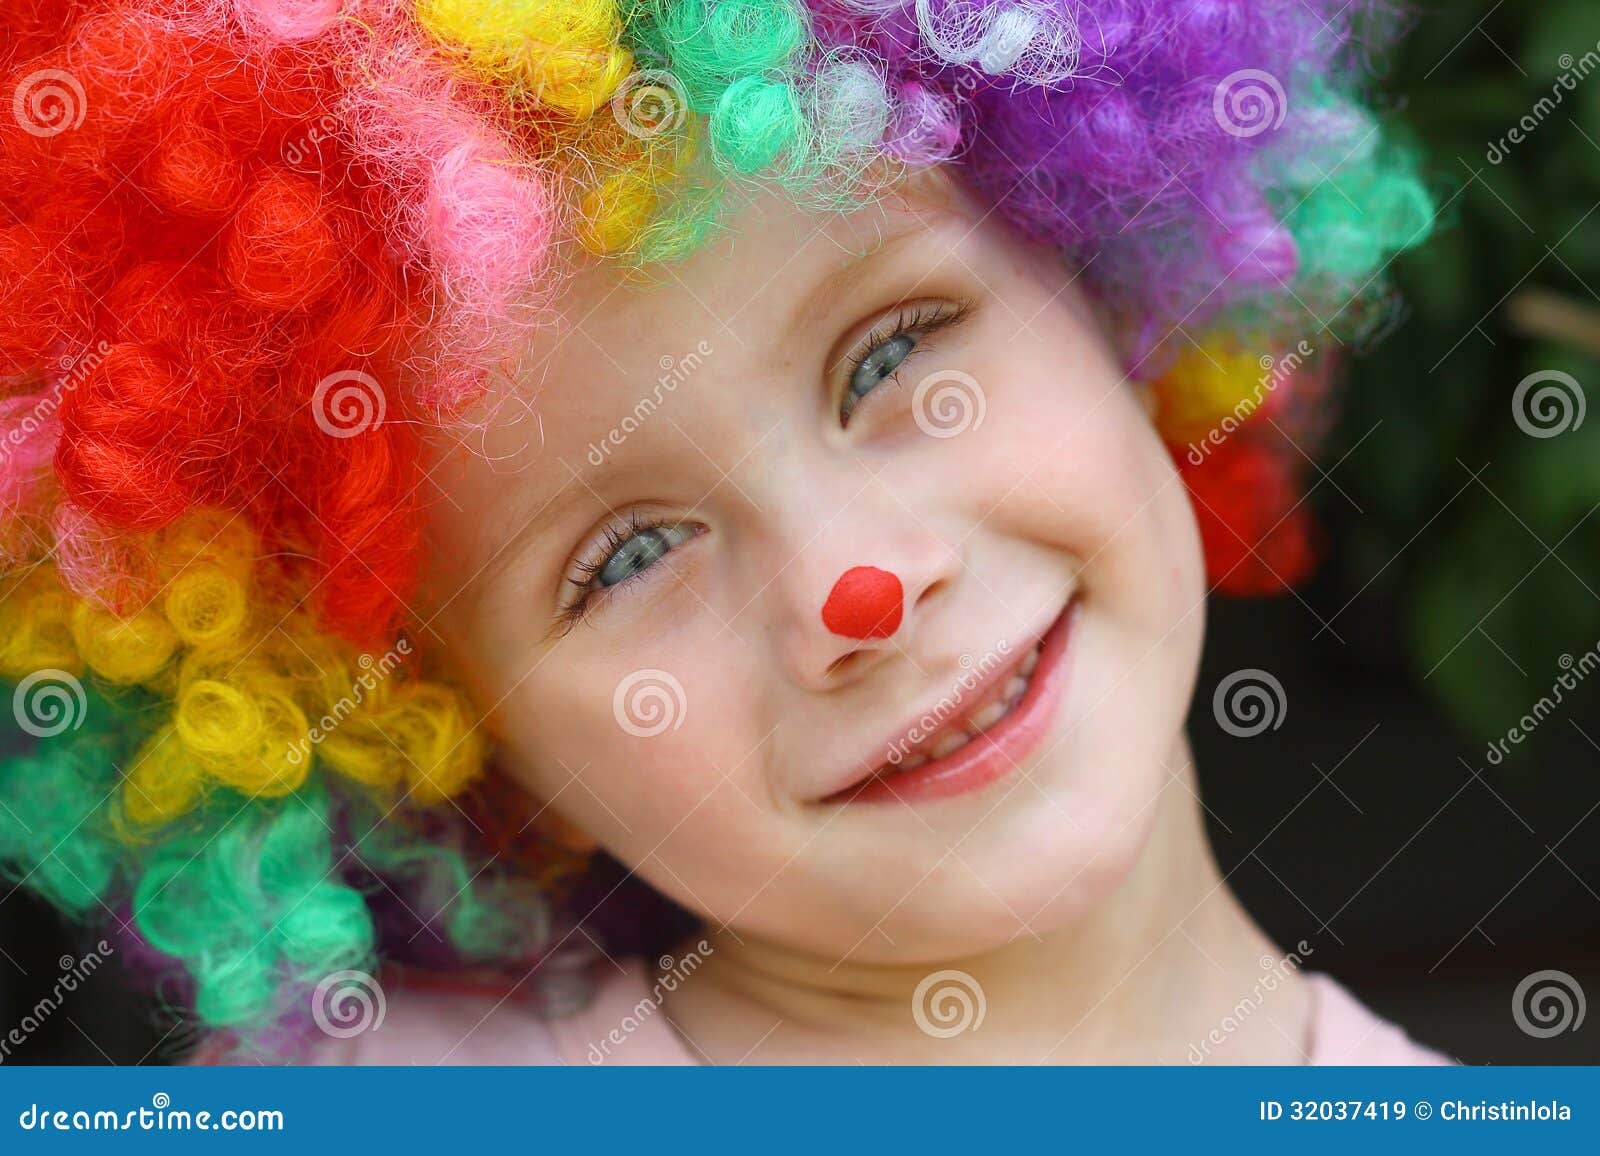 13+ Thousand Clown Face Paint Royalty-Free Images, Stock Photos & Pictures